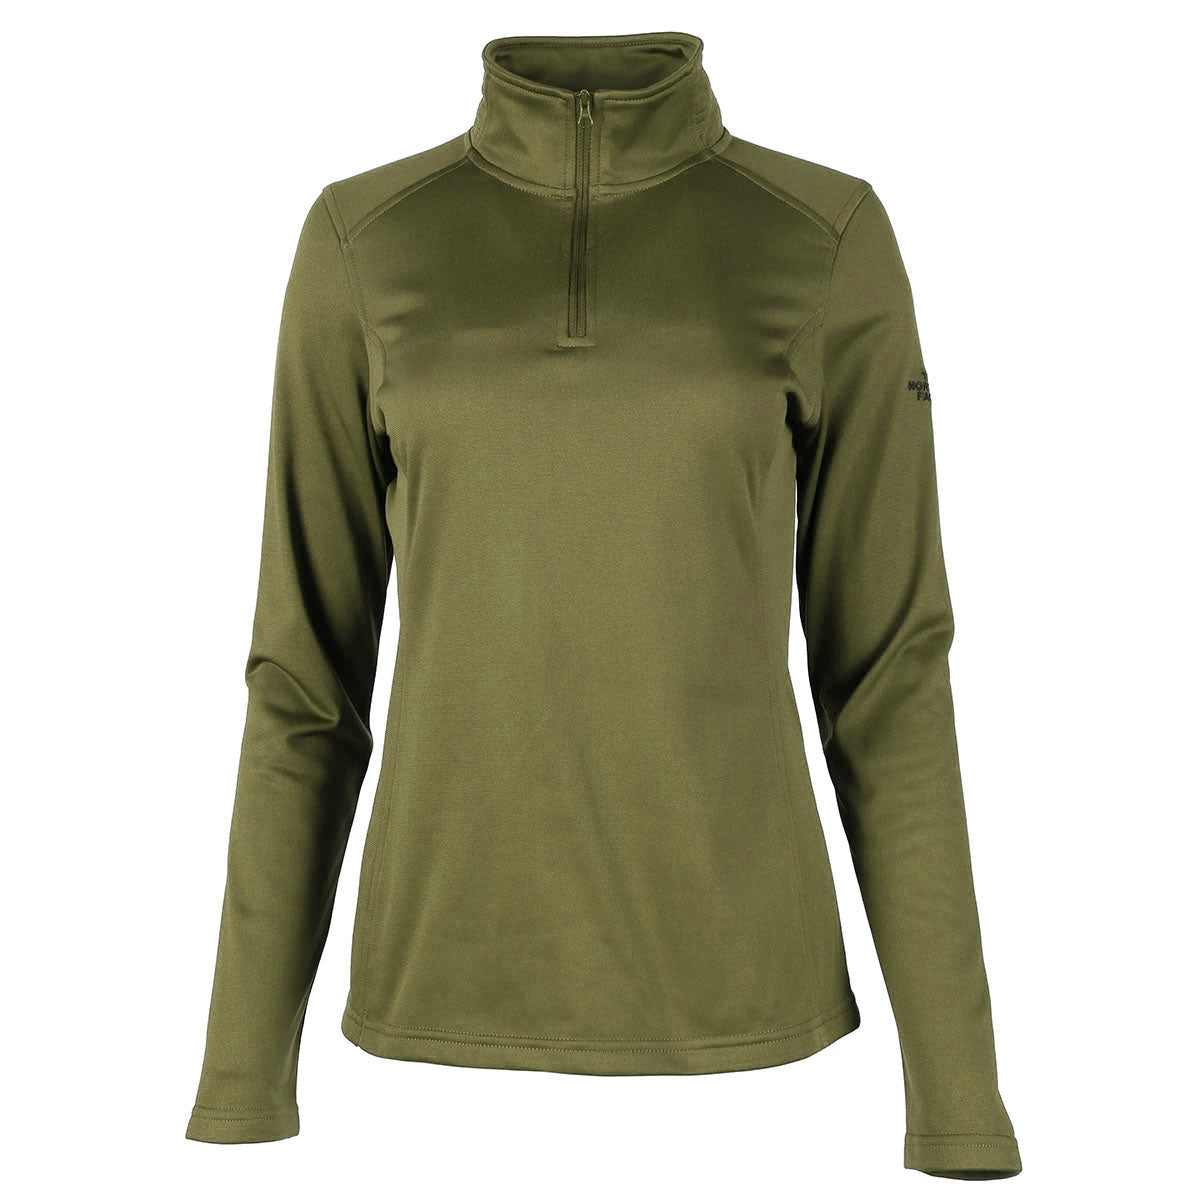 Image of The North Face Women's Tech 1/4 Zip Super Soft